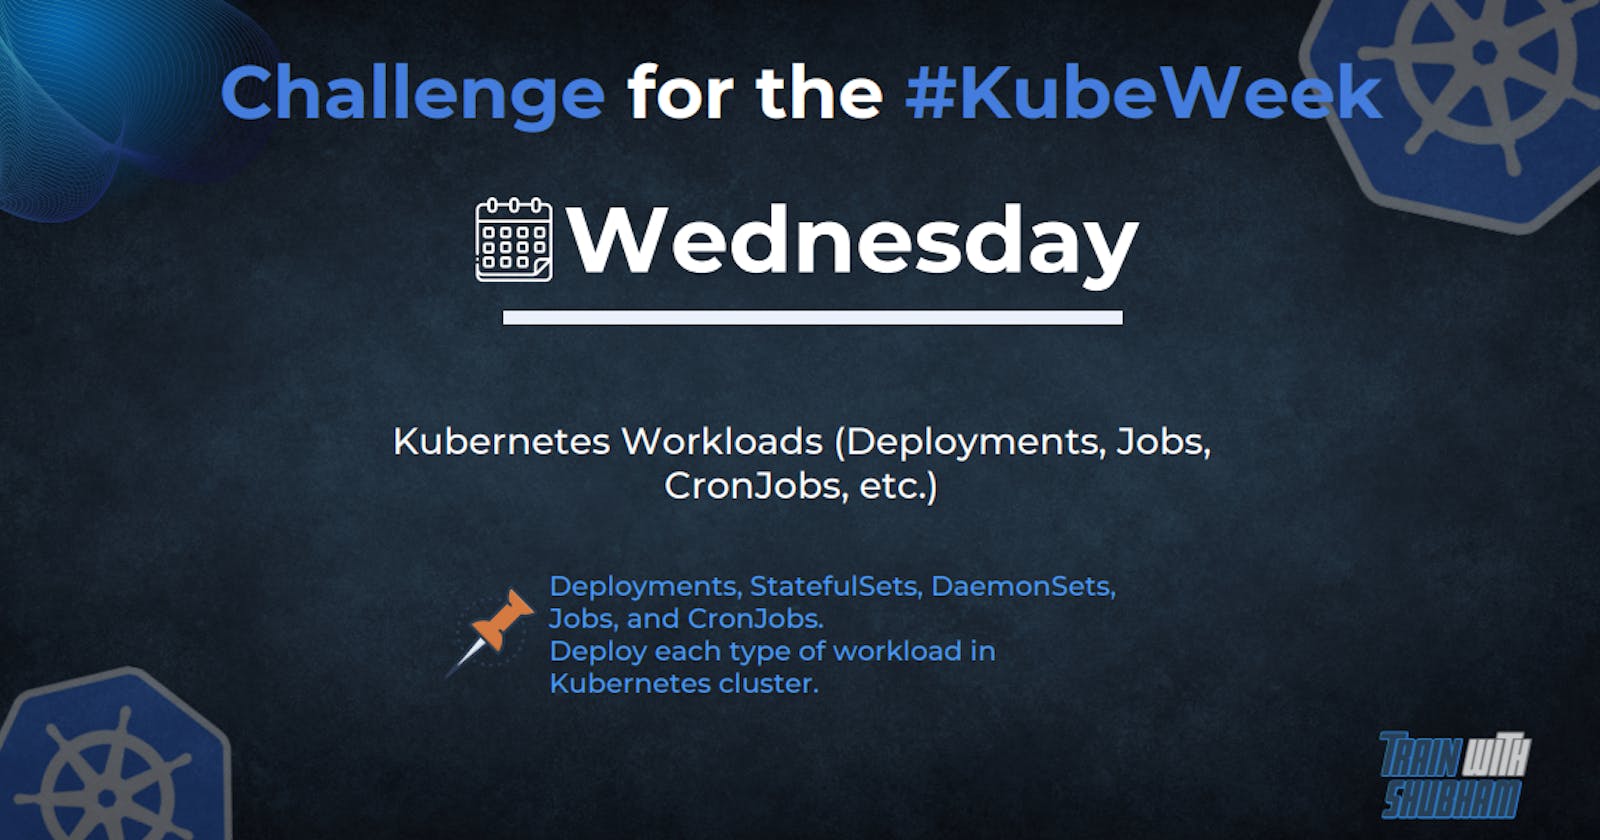 "Deploying Applications with Kubernetes Workloads: A Comprehensive Overview of Deployments, StatefulSets, DaemonSets, Jobs and CronJobs"